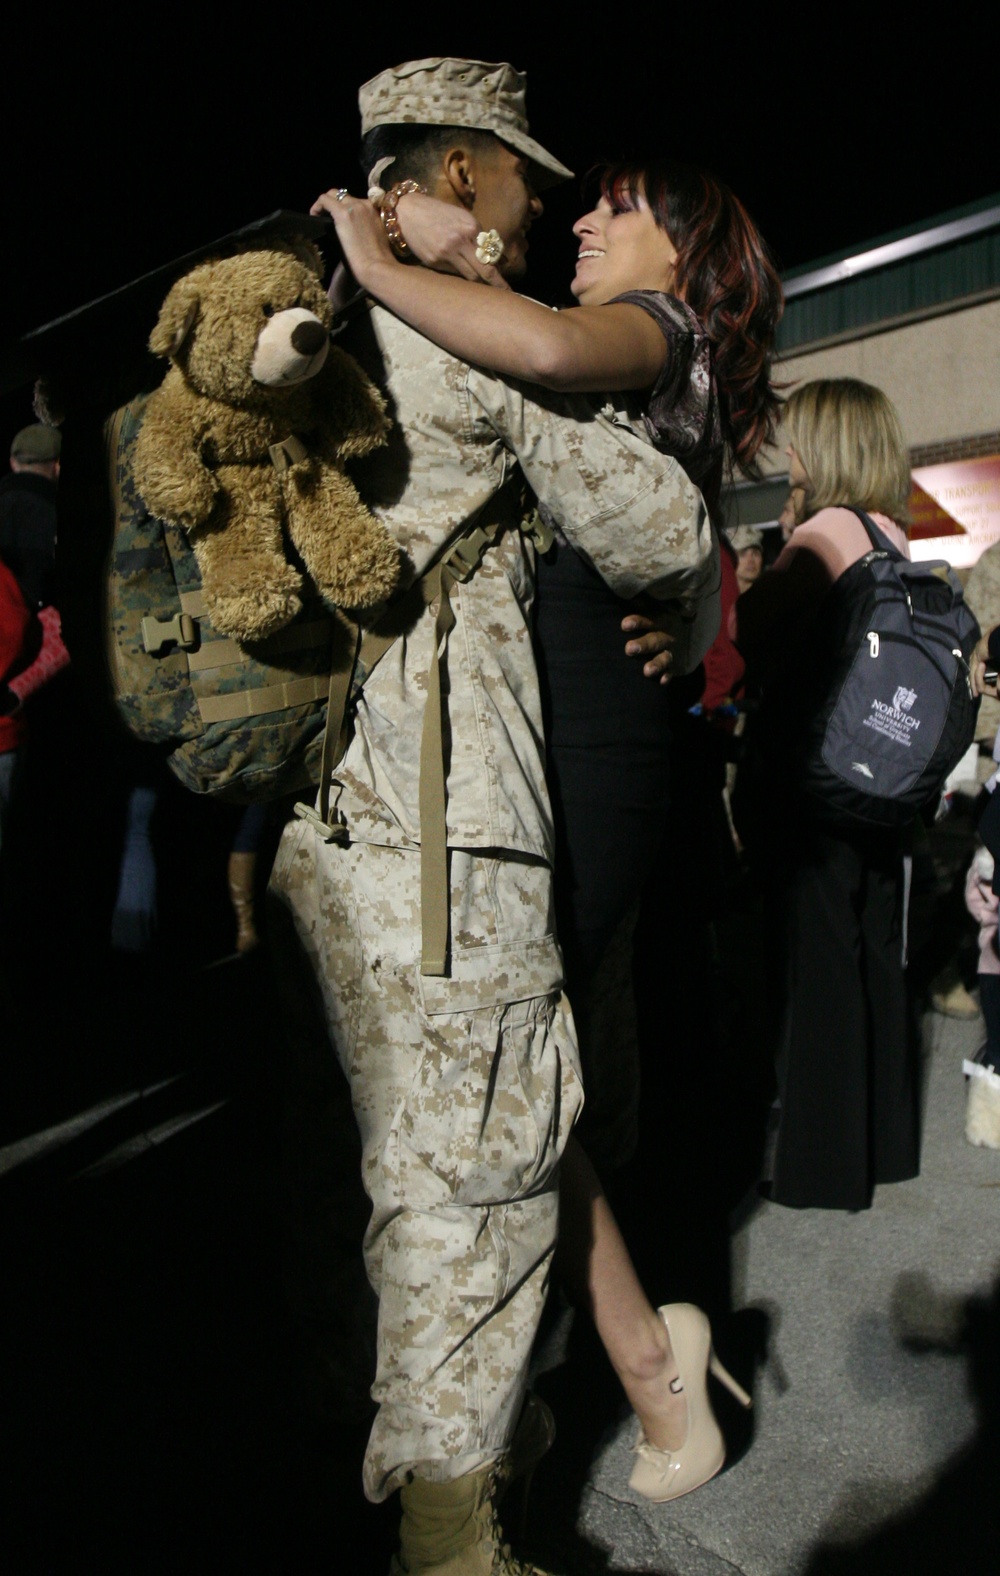 MWSS-272 returns from Afghanistan to family, friends